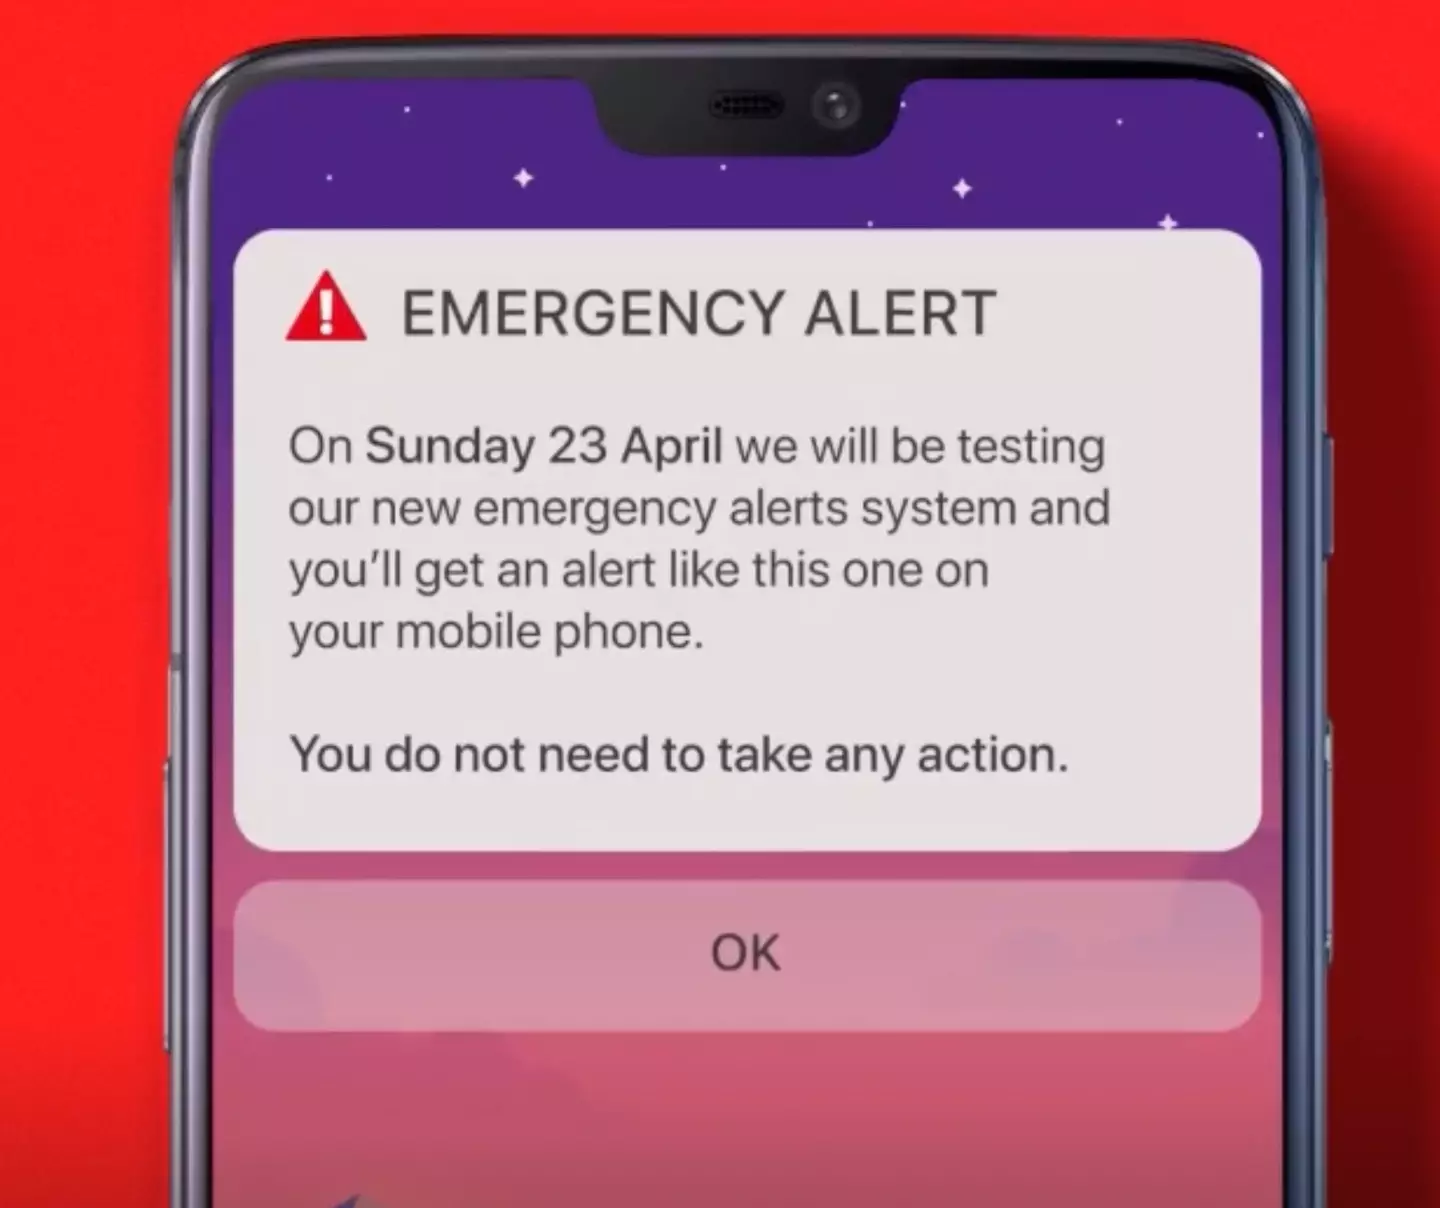 An emergency alert will be sent out this Sunday.